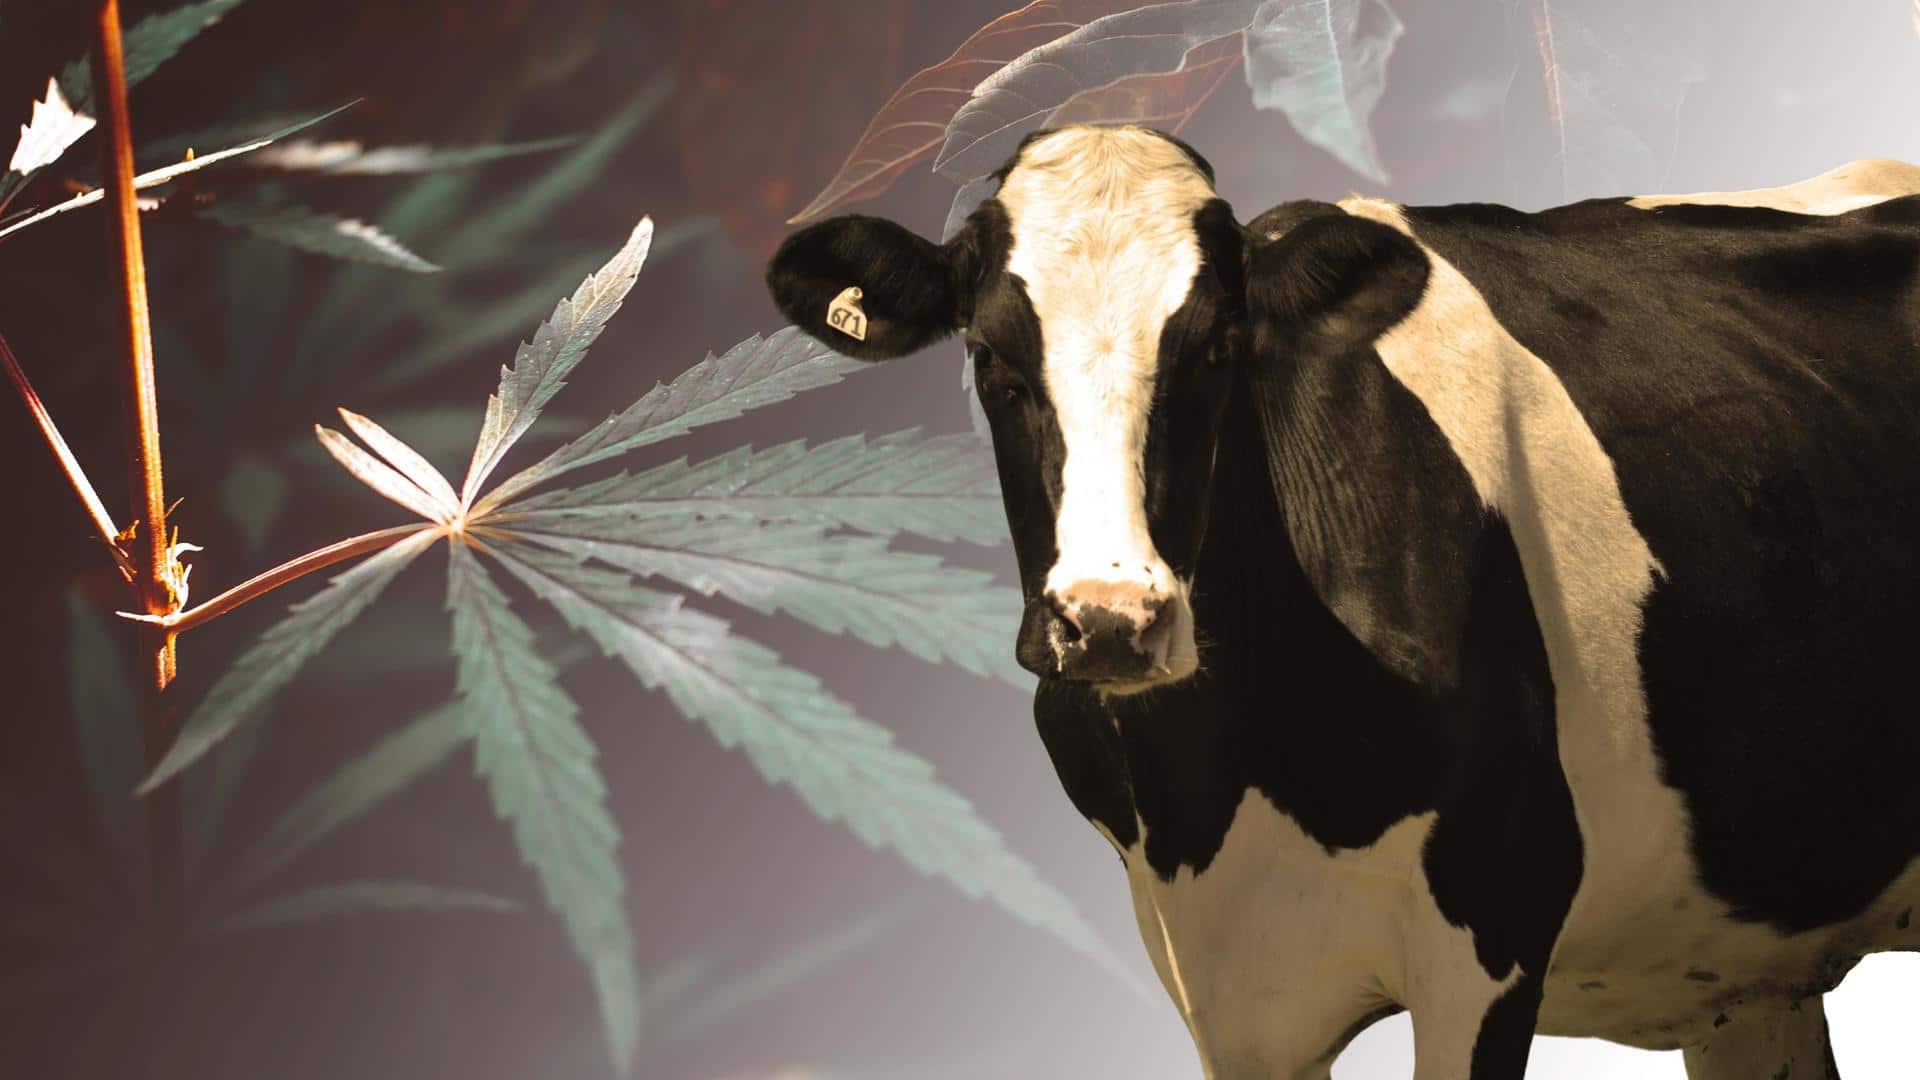 Cows fed with hemp got high; produced milk with THC